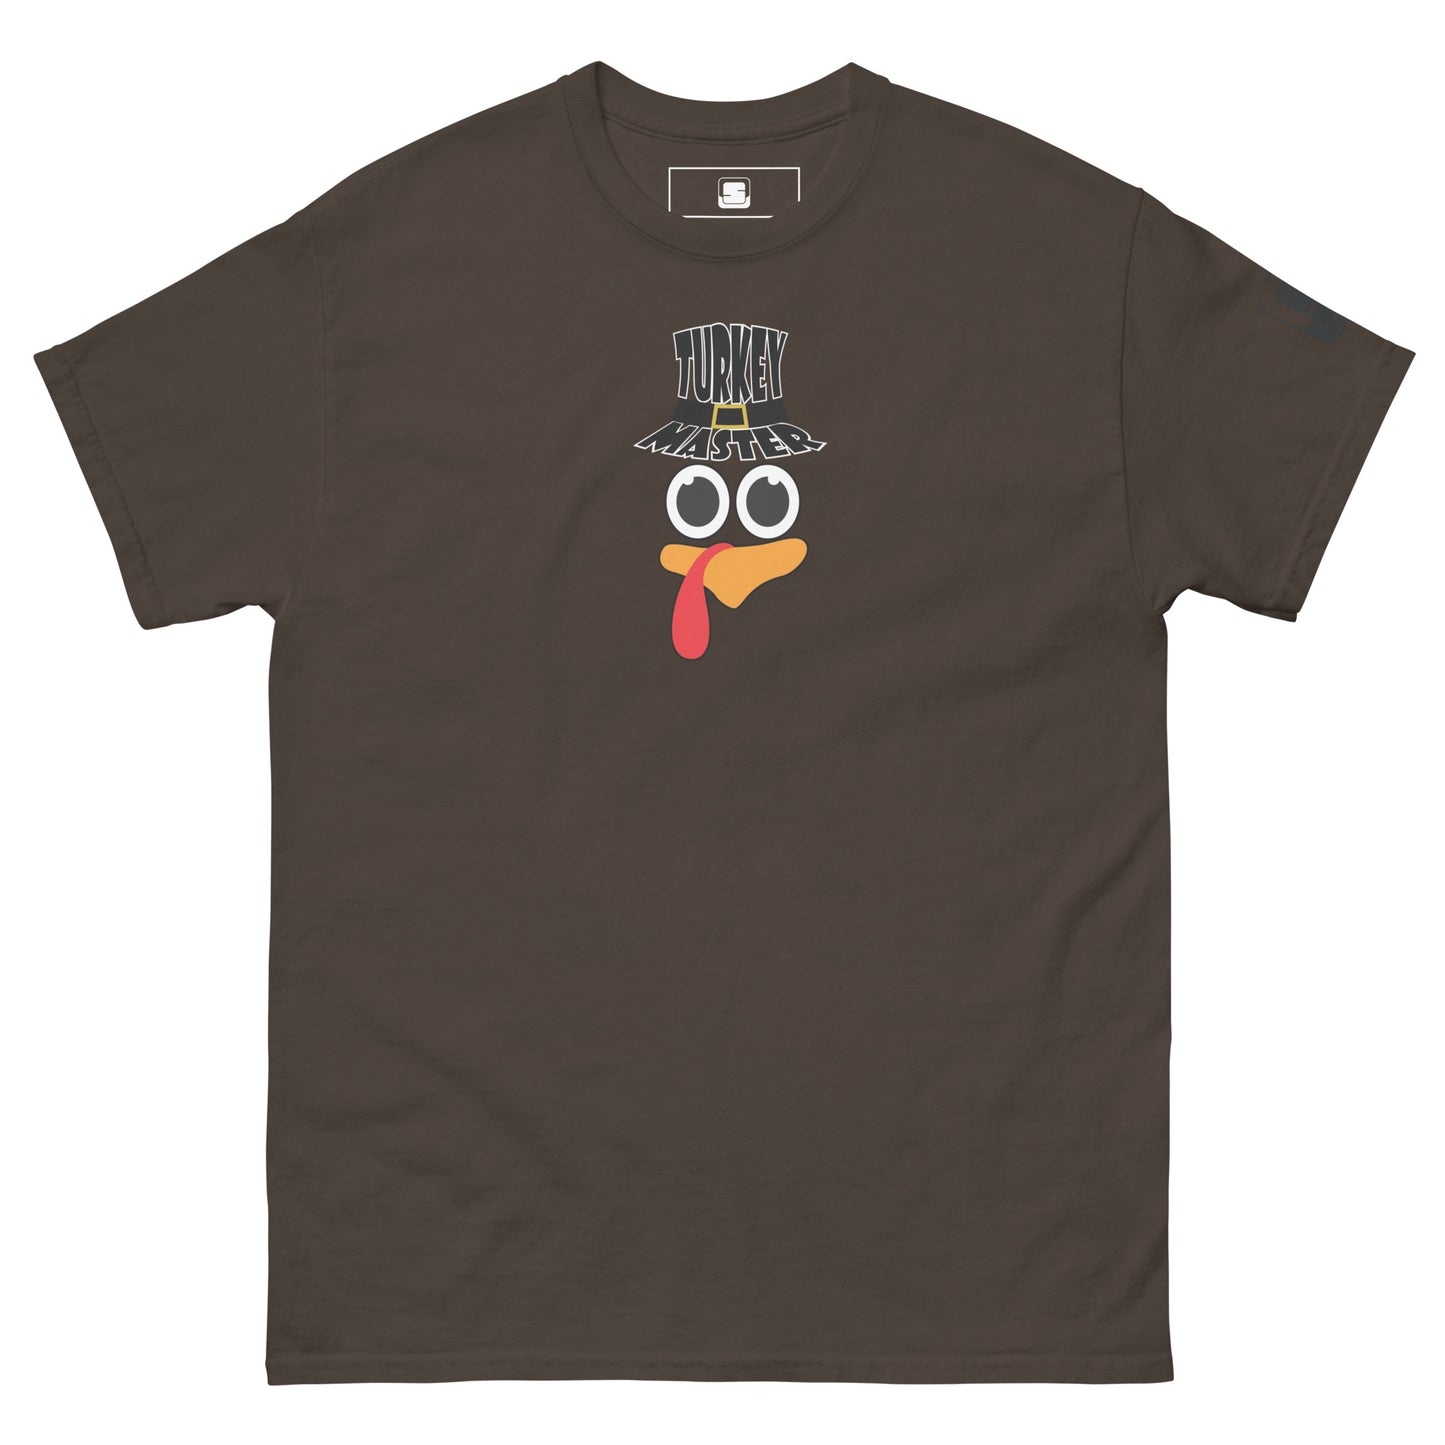 A chocolate brown t-shirt featuring a playful graphic design of a turkey face with eyes, an orange beak, and a red snood. Above the face, the text reads "TURKEY MASTER" in bold, stylized letters. The text is in the shape of a pilgrims hat. On the left sleeve, there's a rectangular logo patch, adding a unique touch. The shirt is laid out flat, showcasing the entire design clearly.